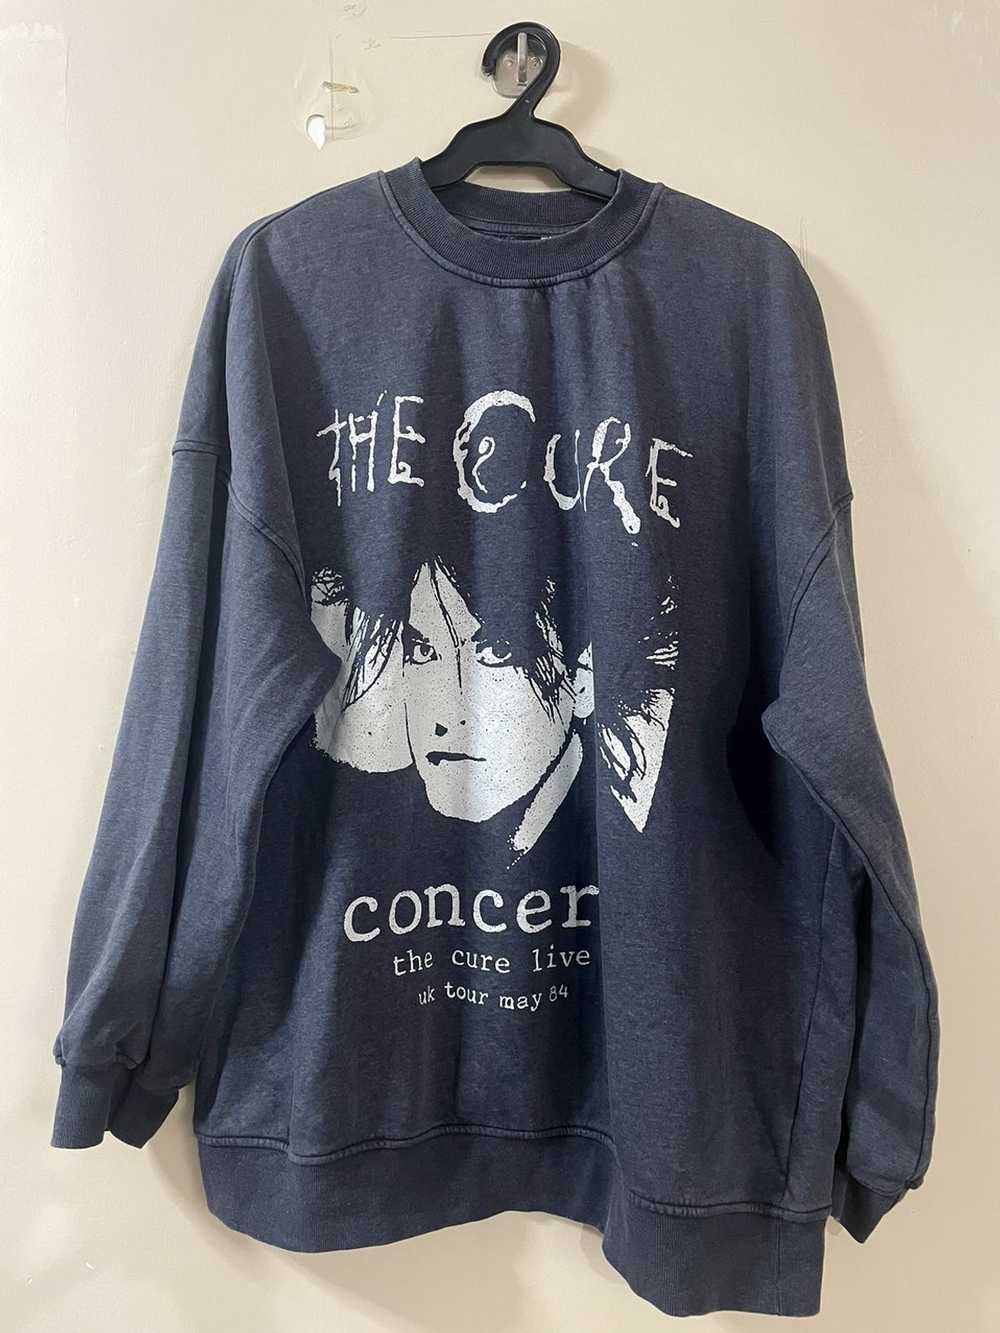 Band Tees Oversized Crewneck The Cure - image 2